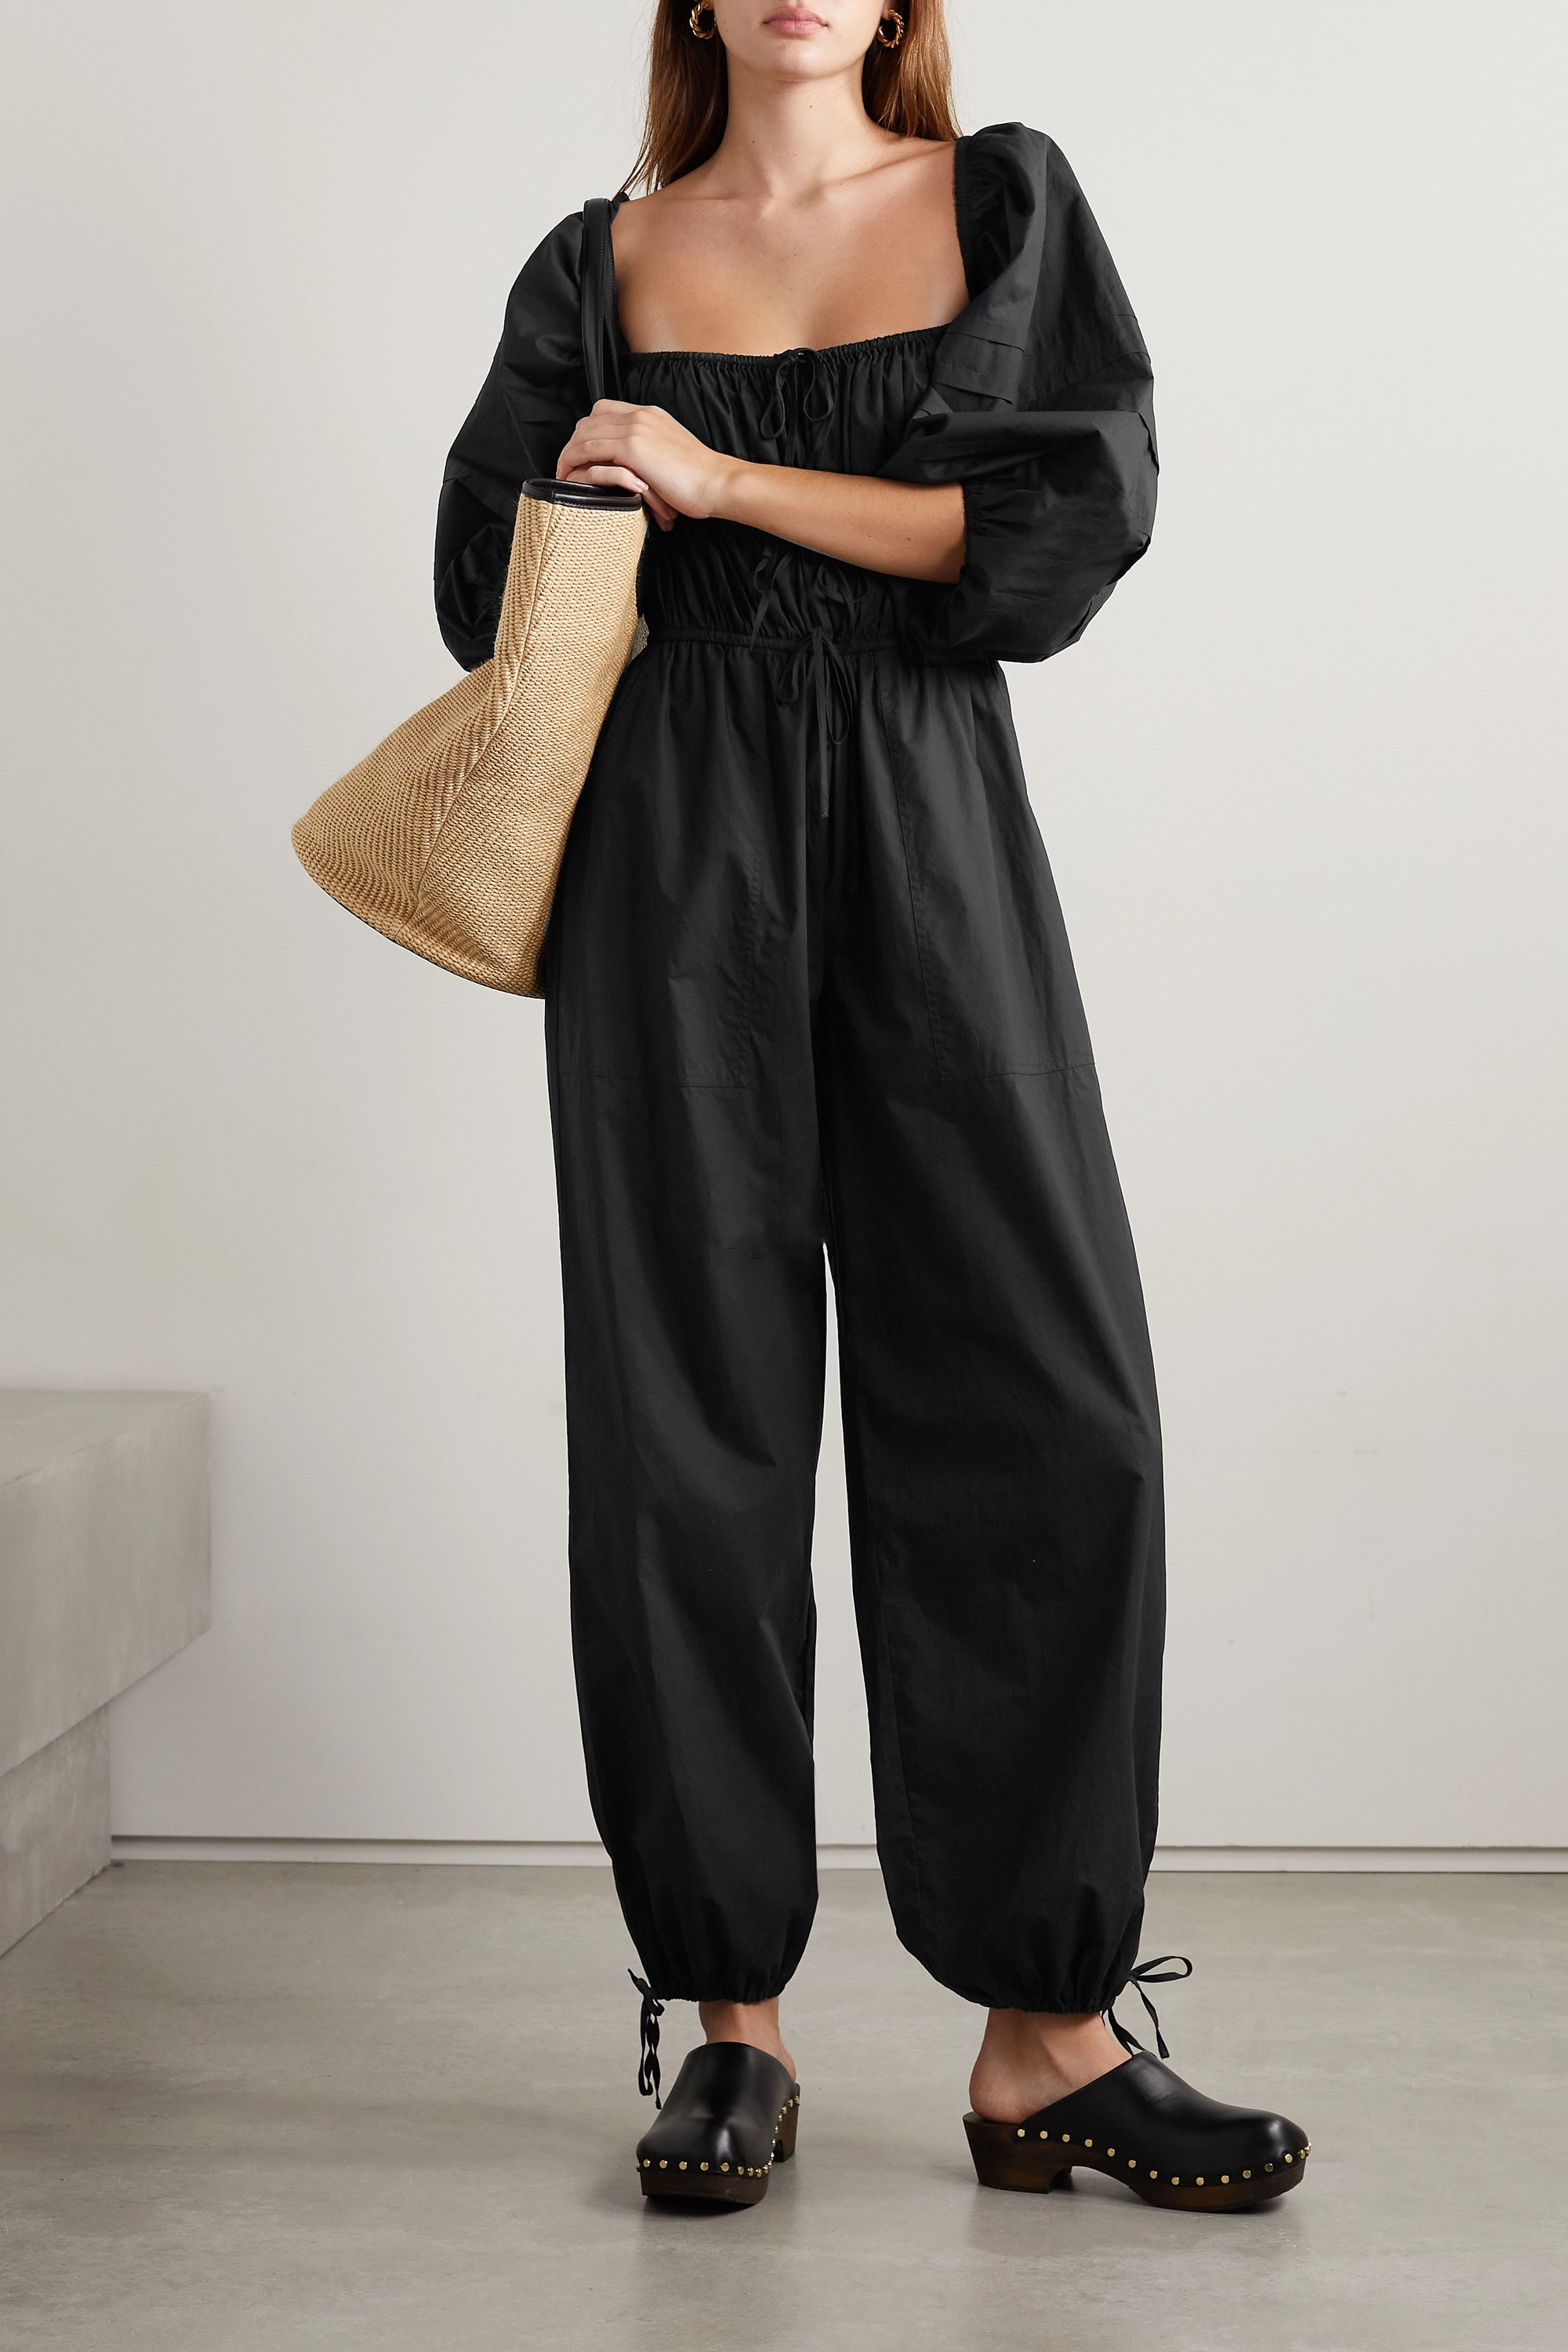 31 Wedding Guest Jumpsuits That We're Ditching Dresses For | Who What Wear